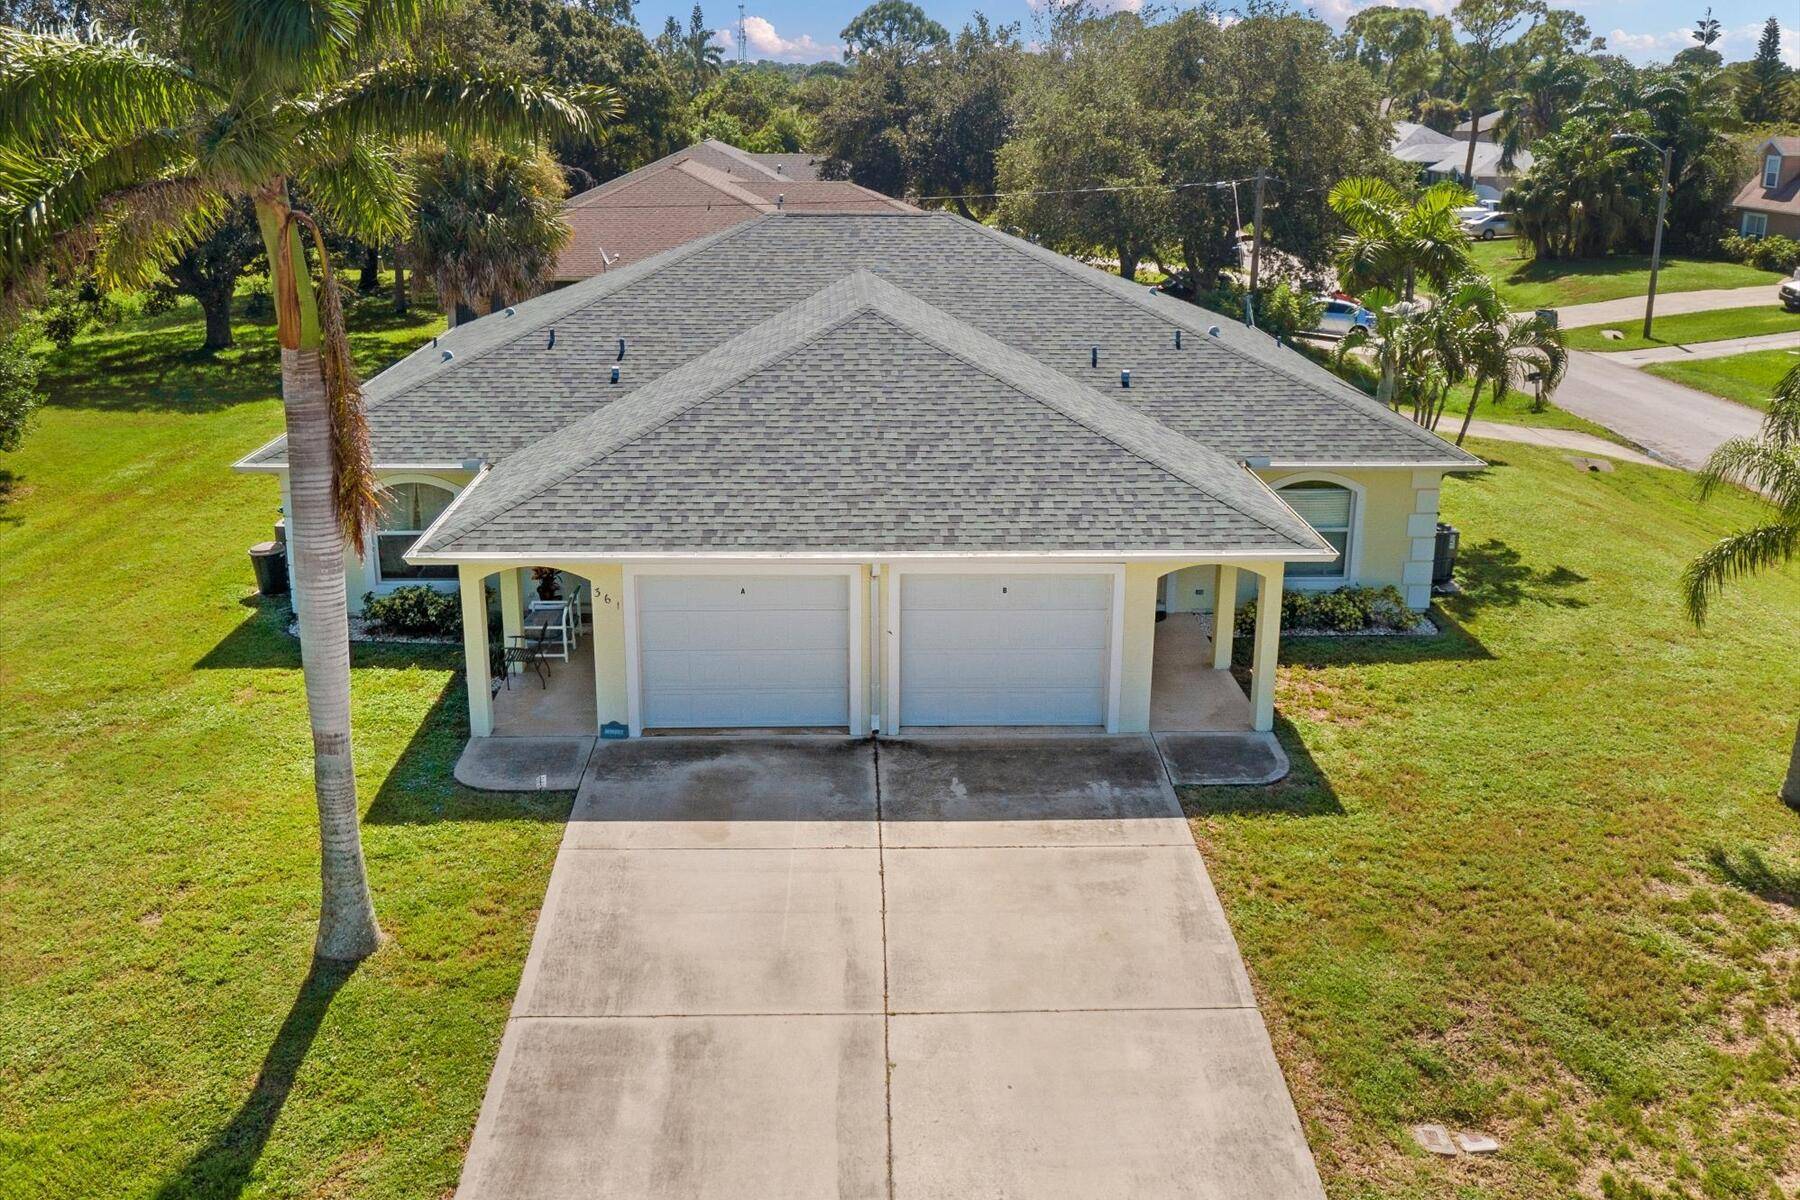 Rare Sebastian Highlands investment opportunity 2005 built, well maintained duplex featuring two 3 bedroom, 2 bathroom 1 car garage units 1416 sq ft each.